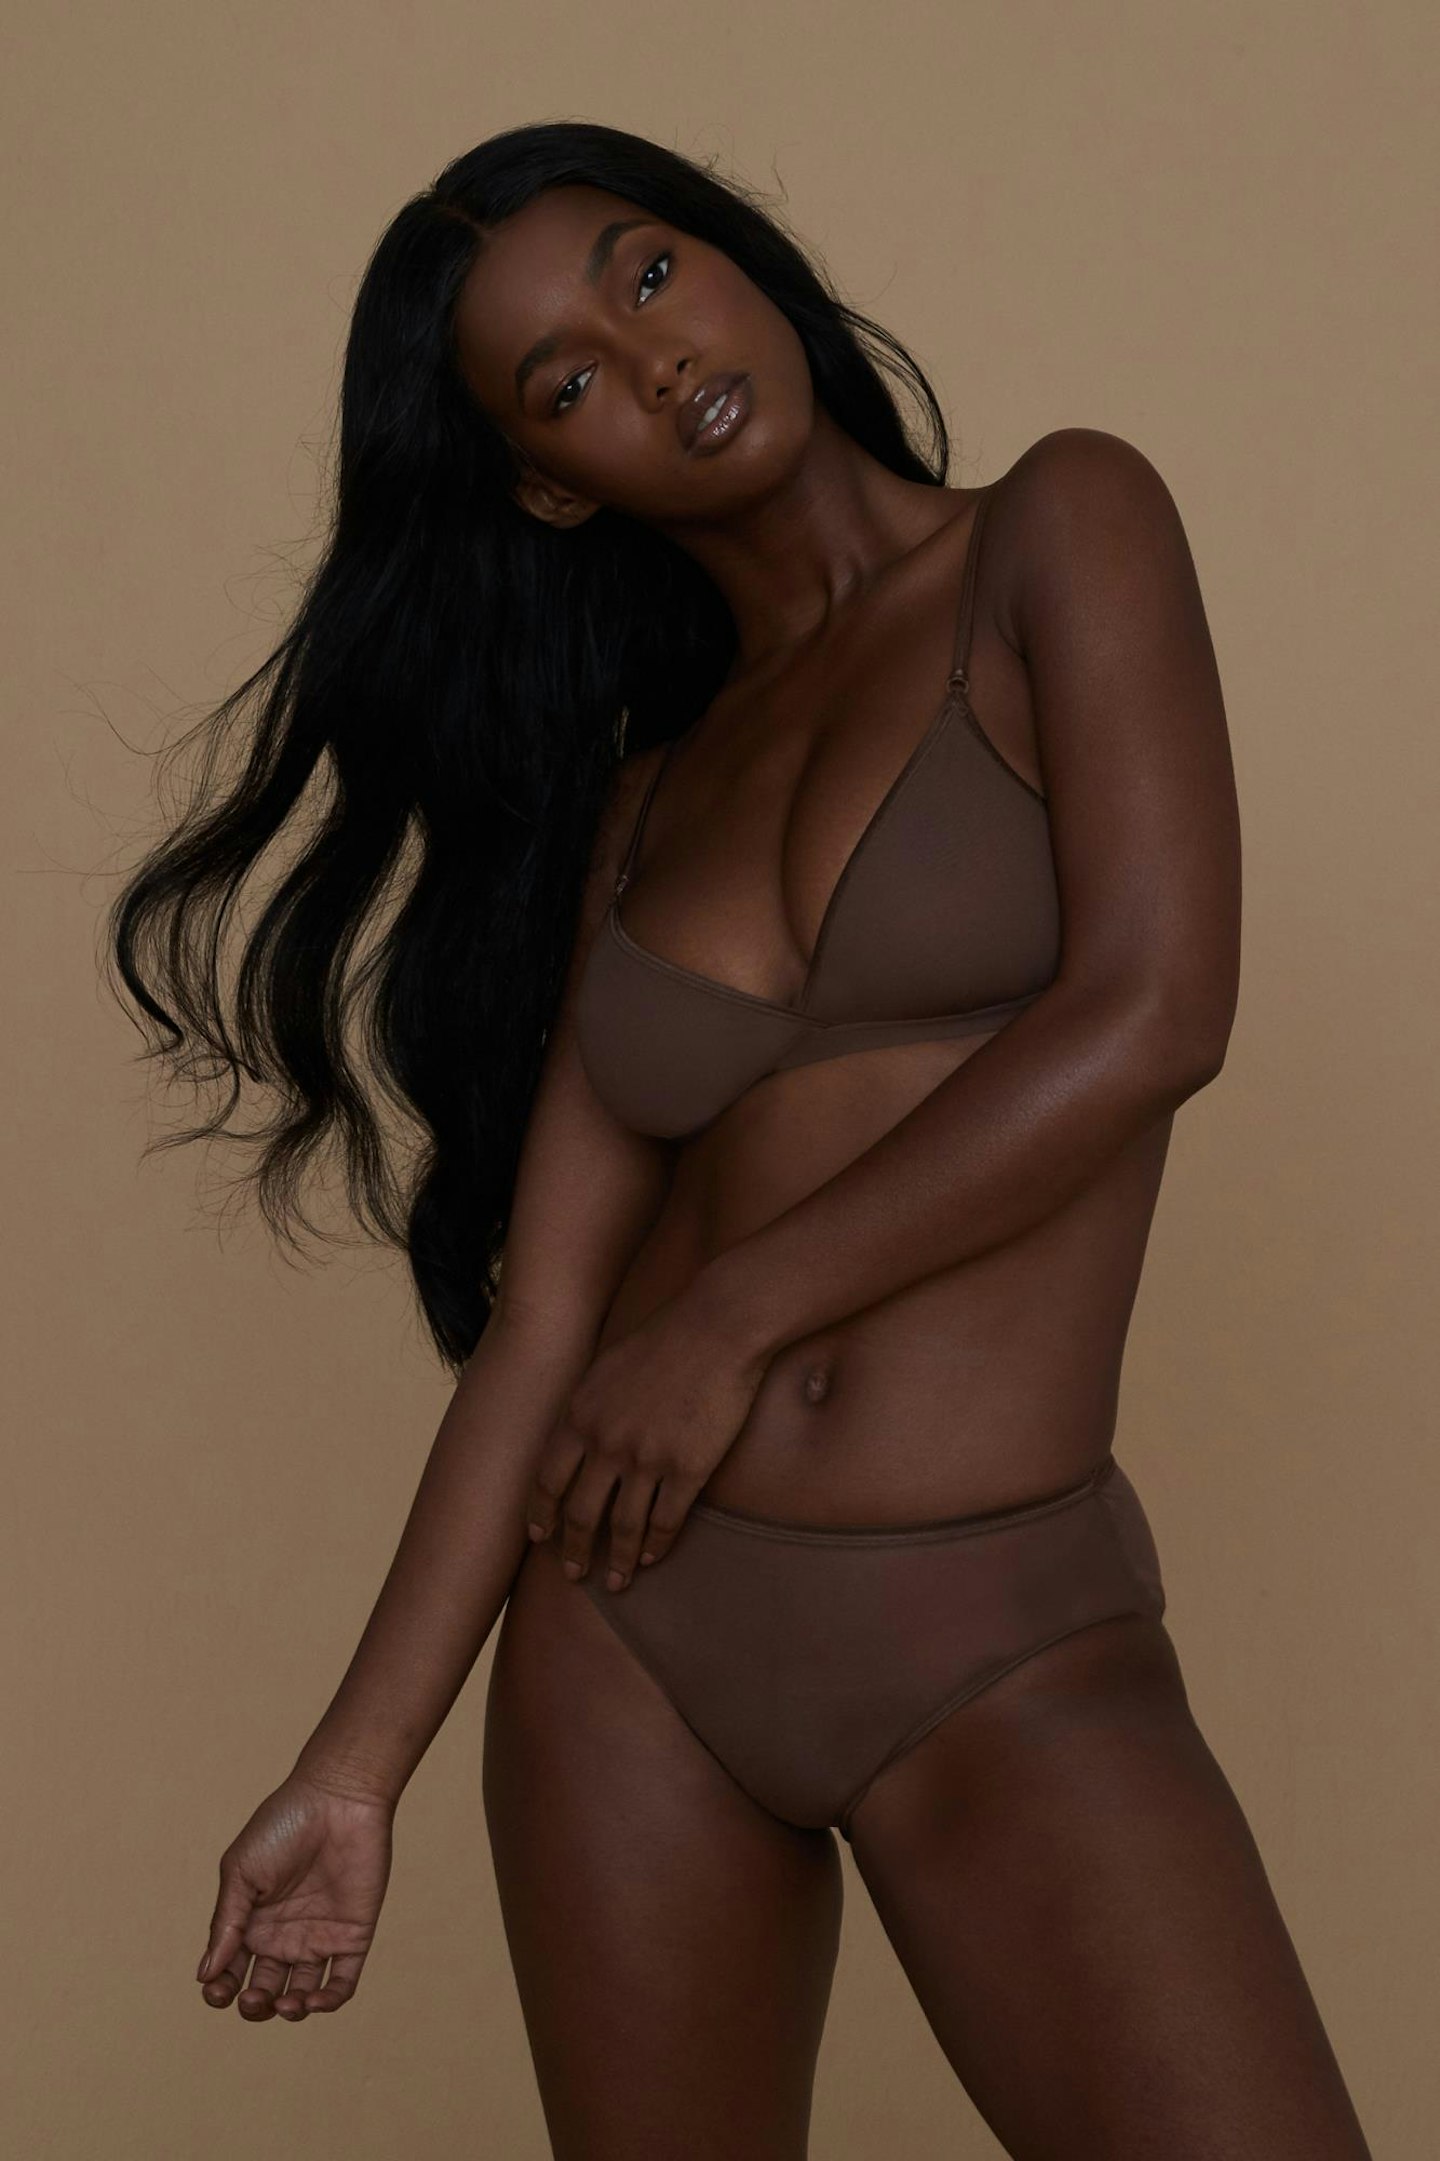 Introducing Nubian Skin: Nude Lingerie and Hosiery for Women of Color